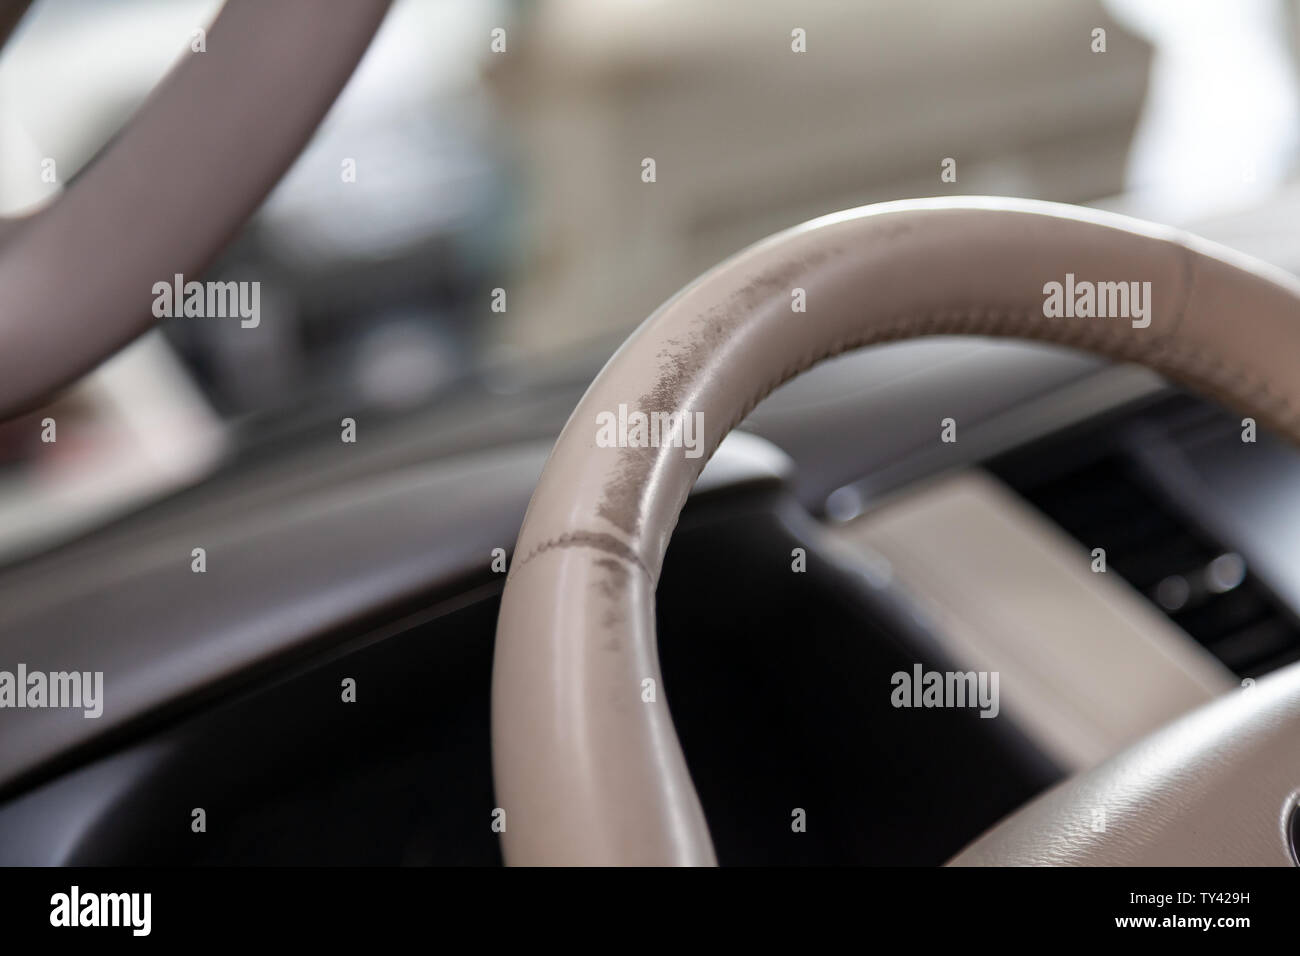 Car Interior With A Beige Leather Steering Wheel Close Up